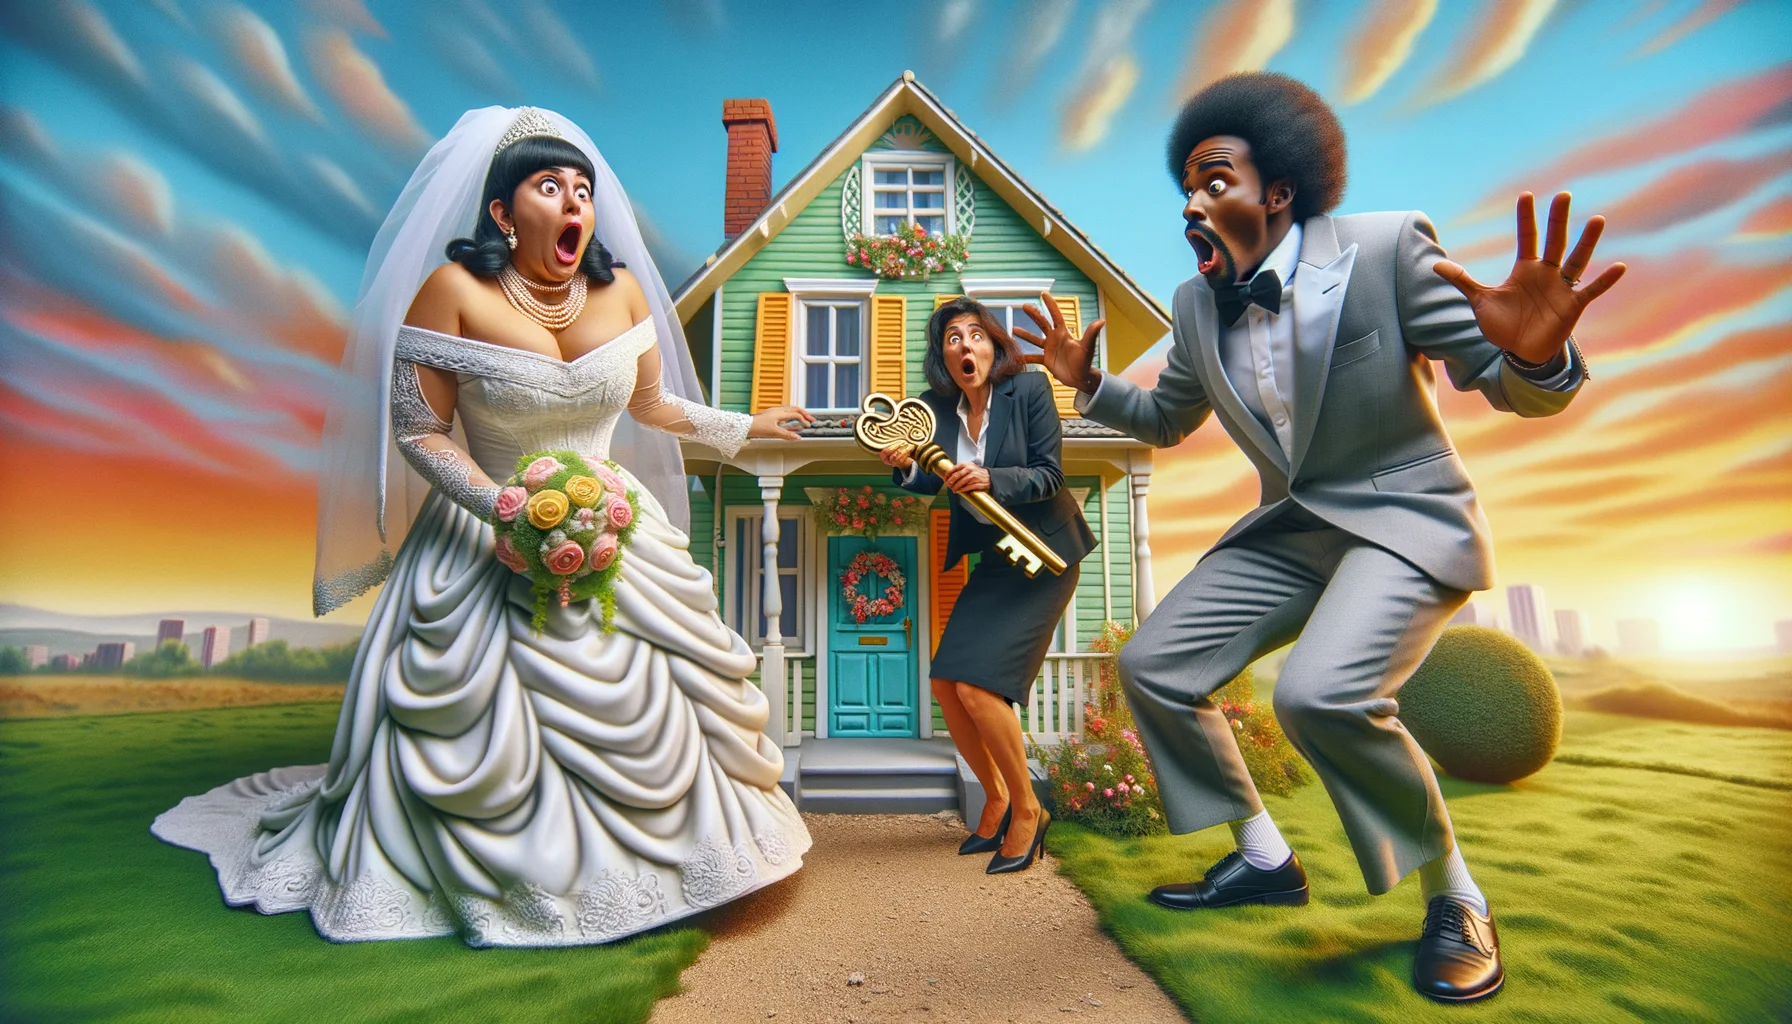 Imagine a highly amusing and memorable scene of two newlyweds buying a home. A Hispanic man and a Black woman, each wearing traditional wedding attire, expressions of shock and hilarity on their faces. They are standing in front of a whimsically designed house that's unexpectedly a miniature, only about their knees high, startling the local estate agent who is a Middle-Eastern woman, trying to contain her laughter while holding up an oversized key. The background features a vibrant green lawn and a painted sunset that adds to the comic realism of the scene.